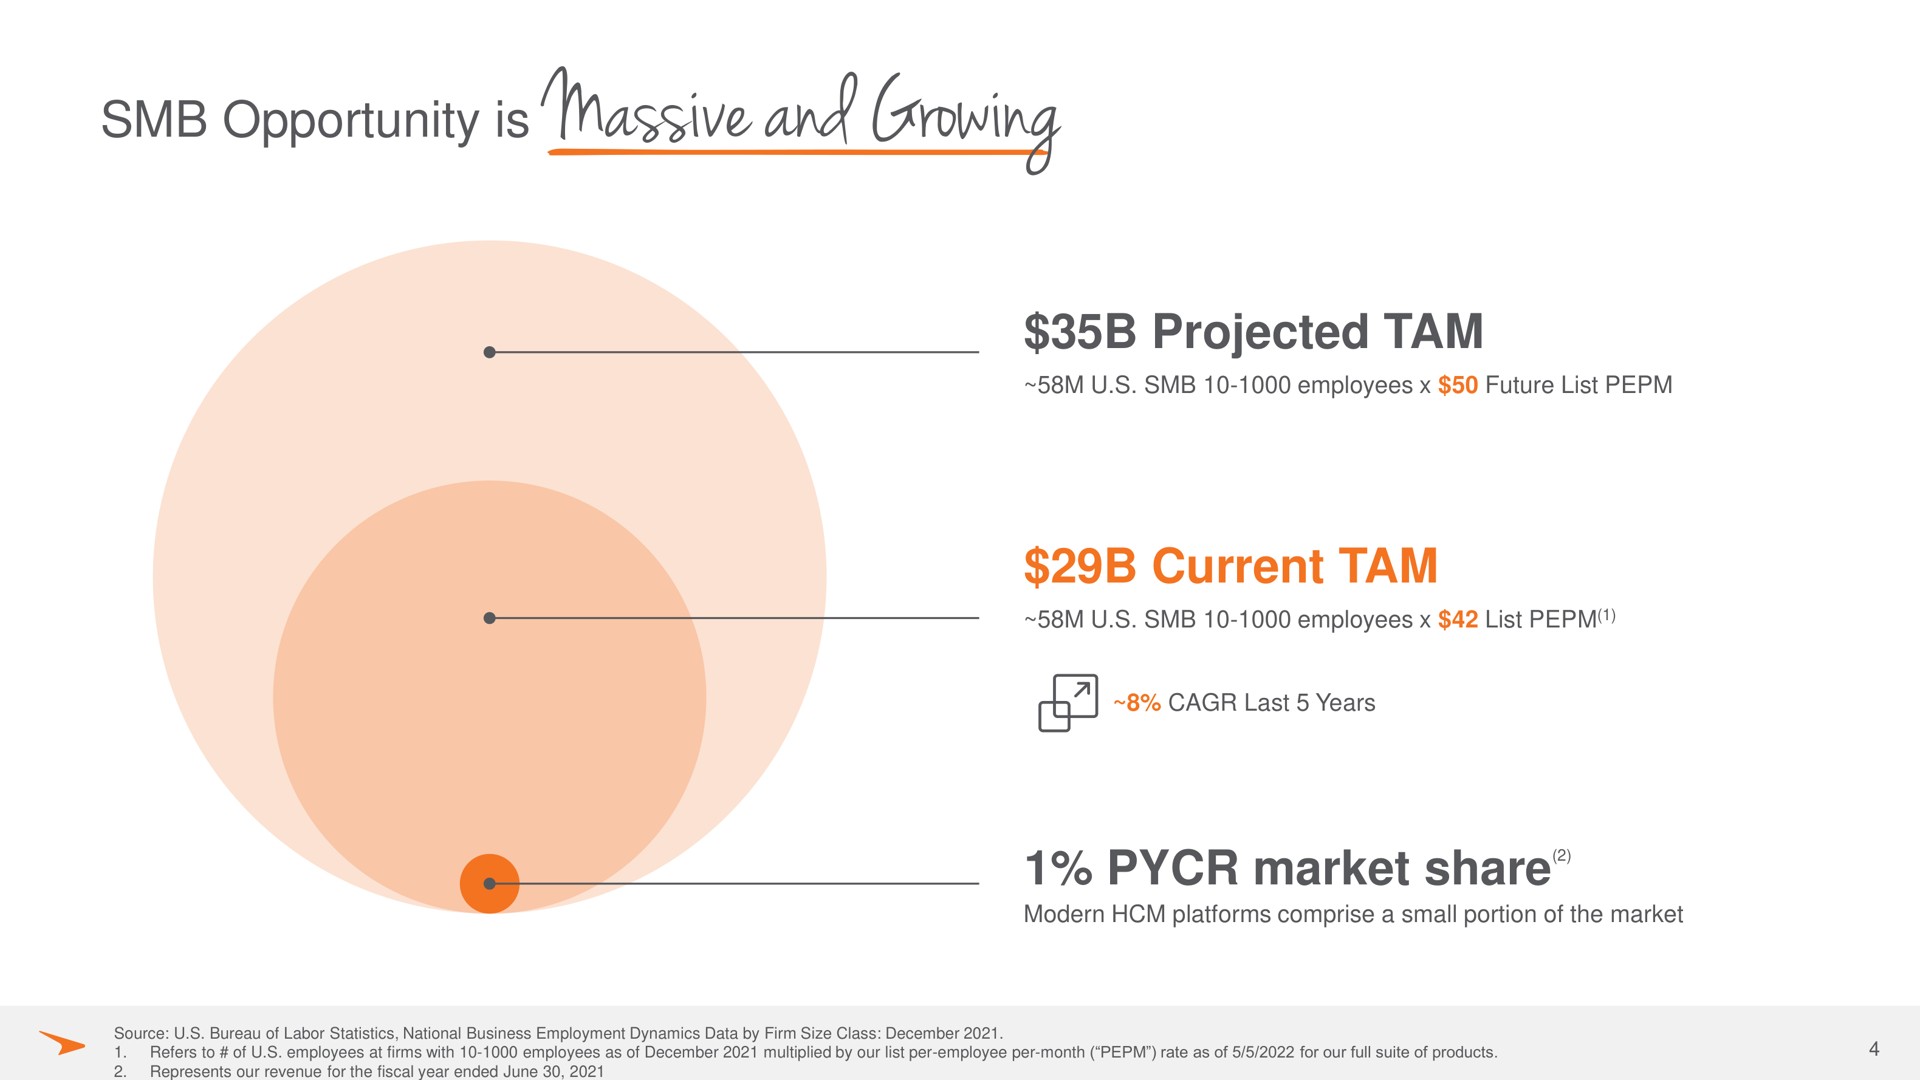 opportunity is massive and growing crewing | Paycor